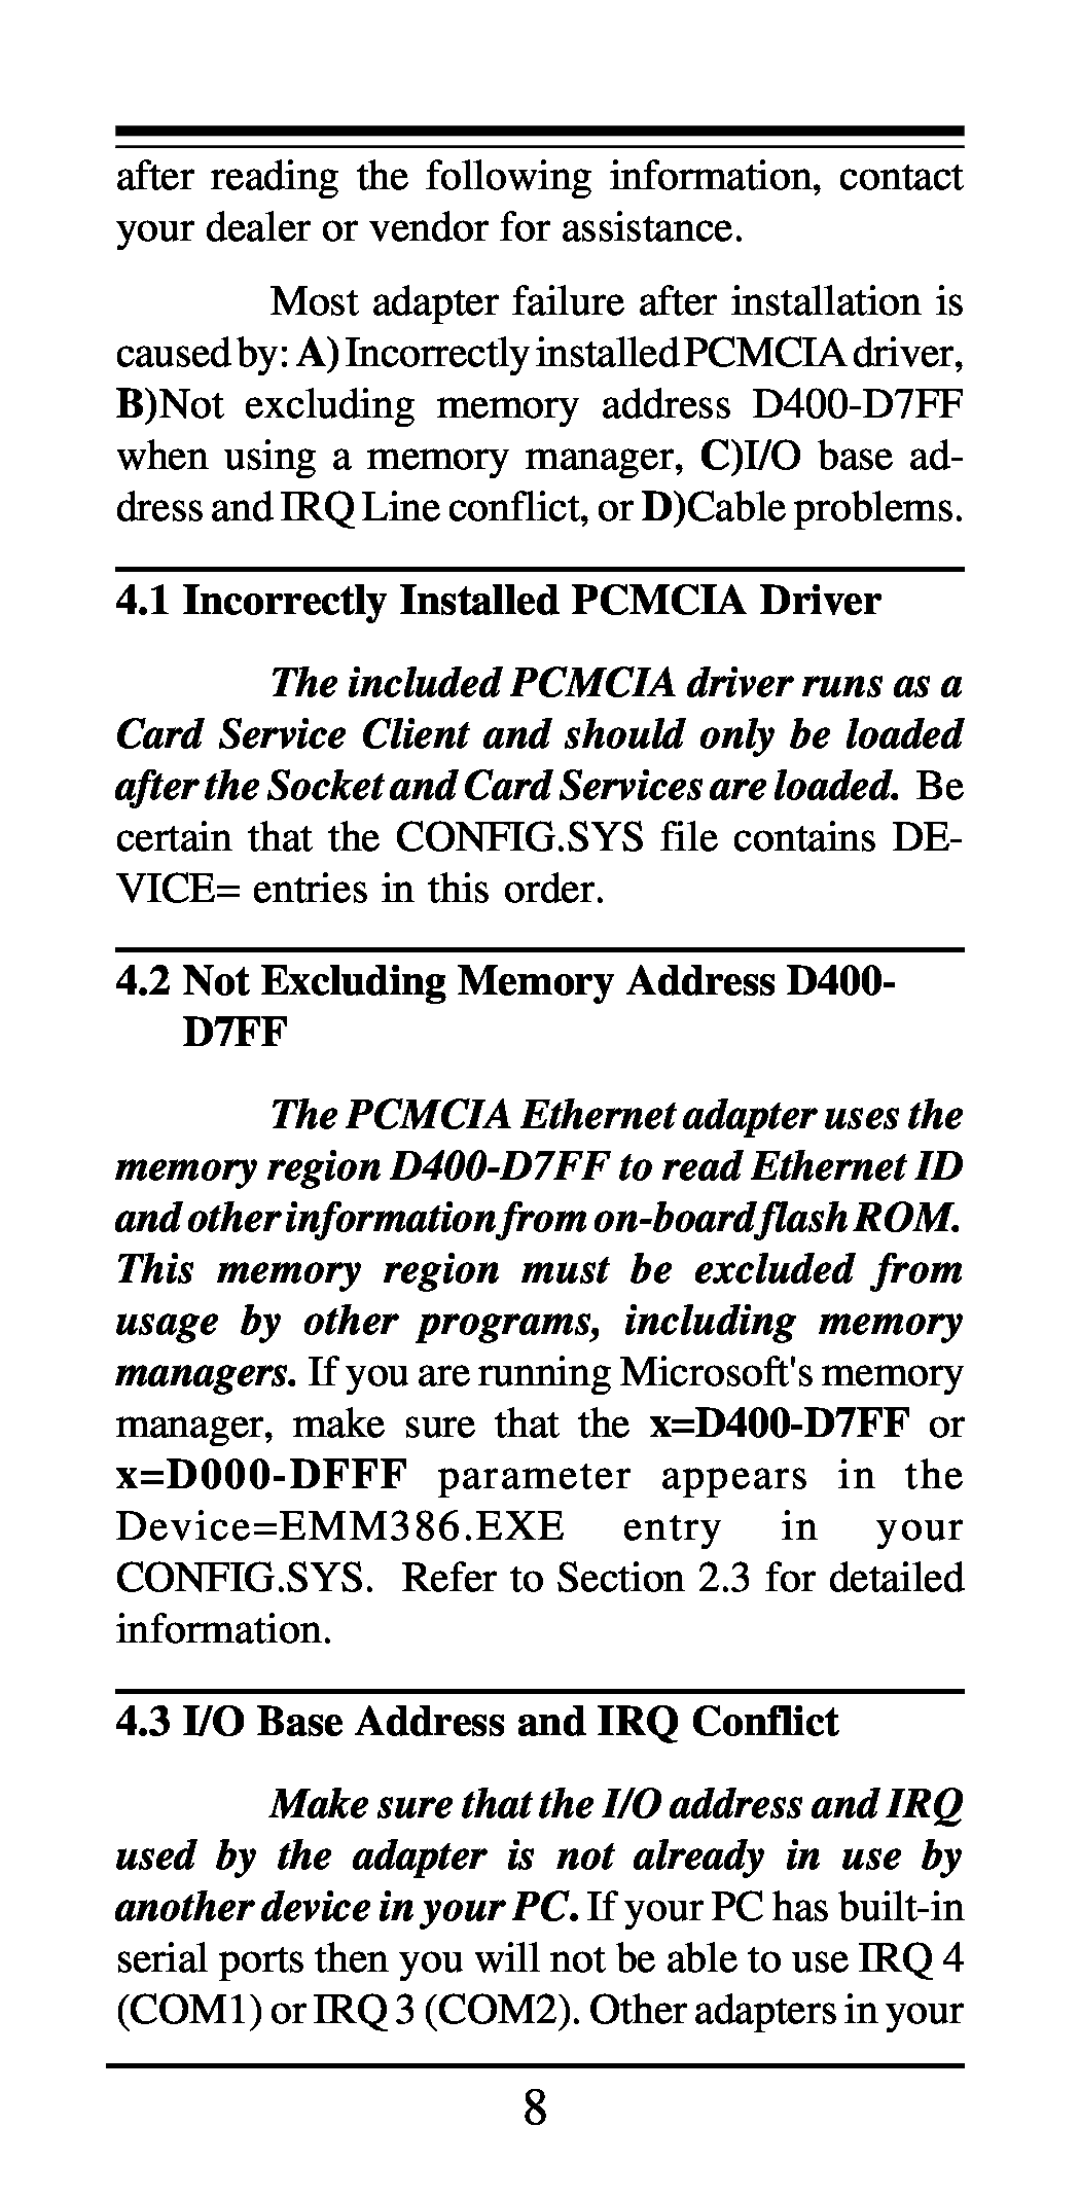 MaxTech PCN2000 Series manual Incorrectly Installed PCMCIA Driver, Not Excluding Memory Address D400- D7FF 